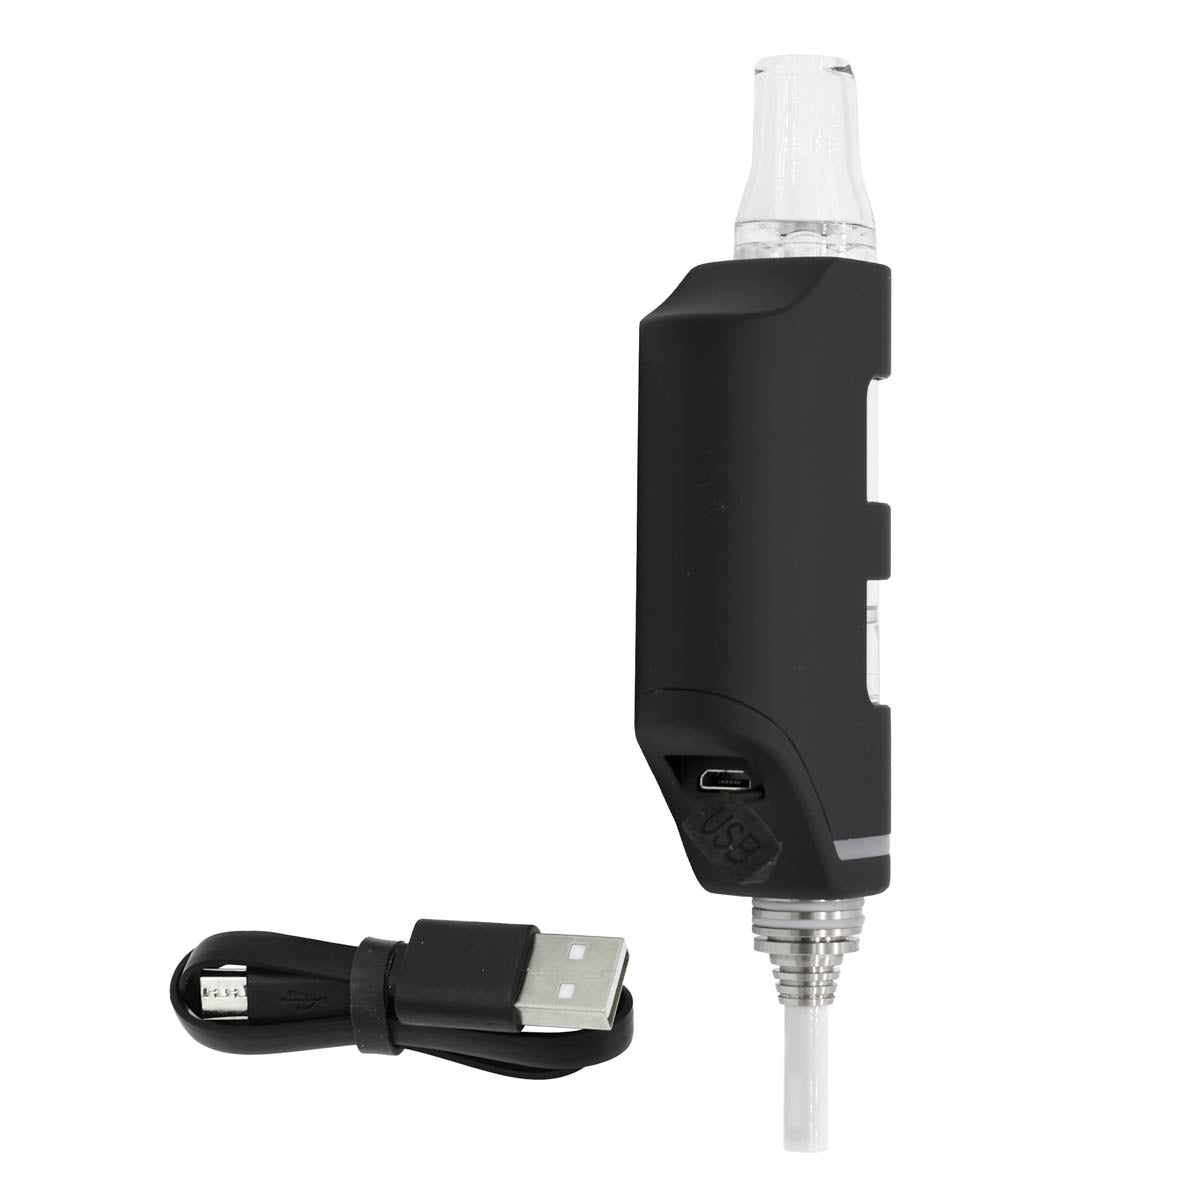 Stinger Nectar Collector USB charging port and included charging cable